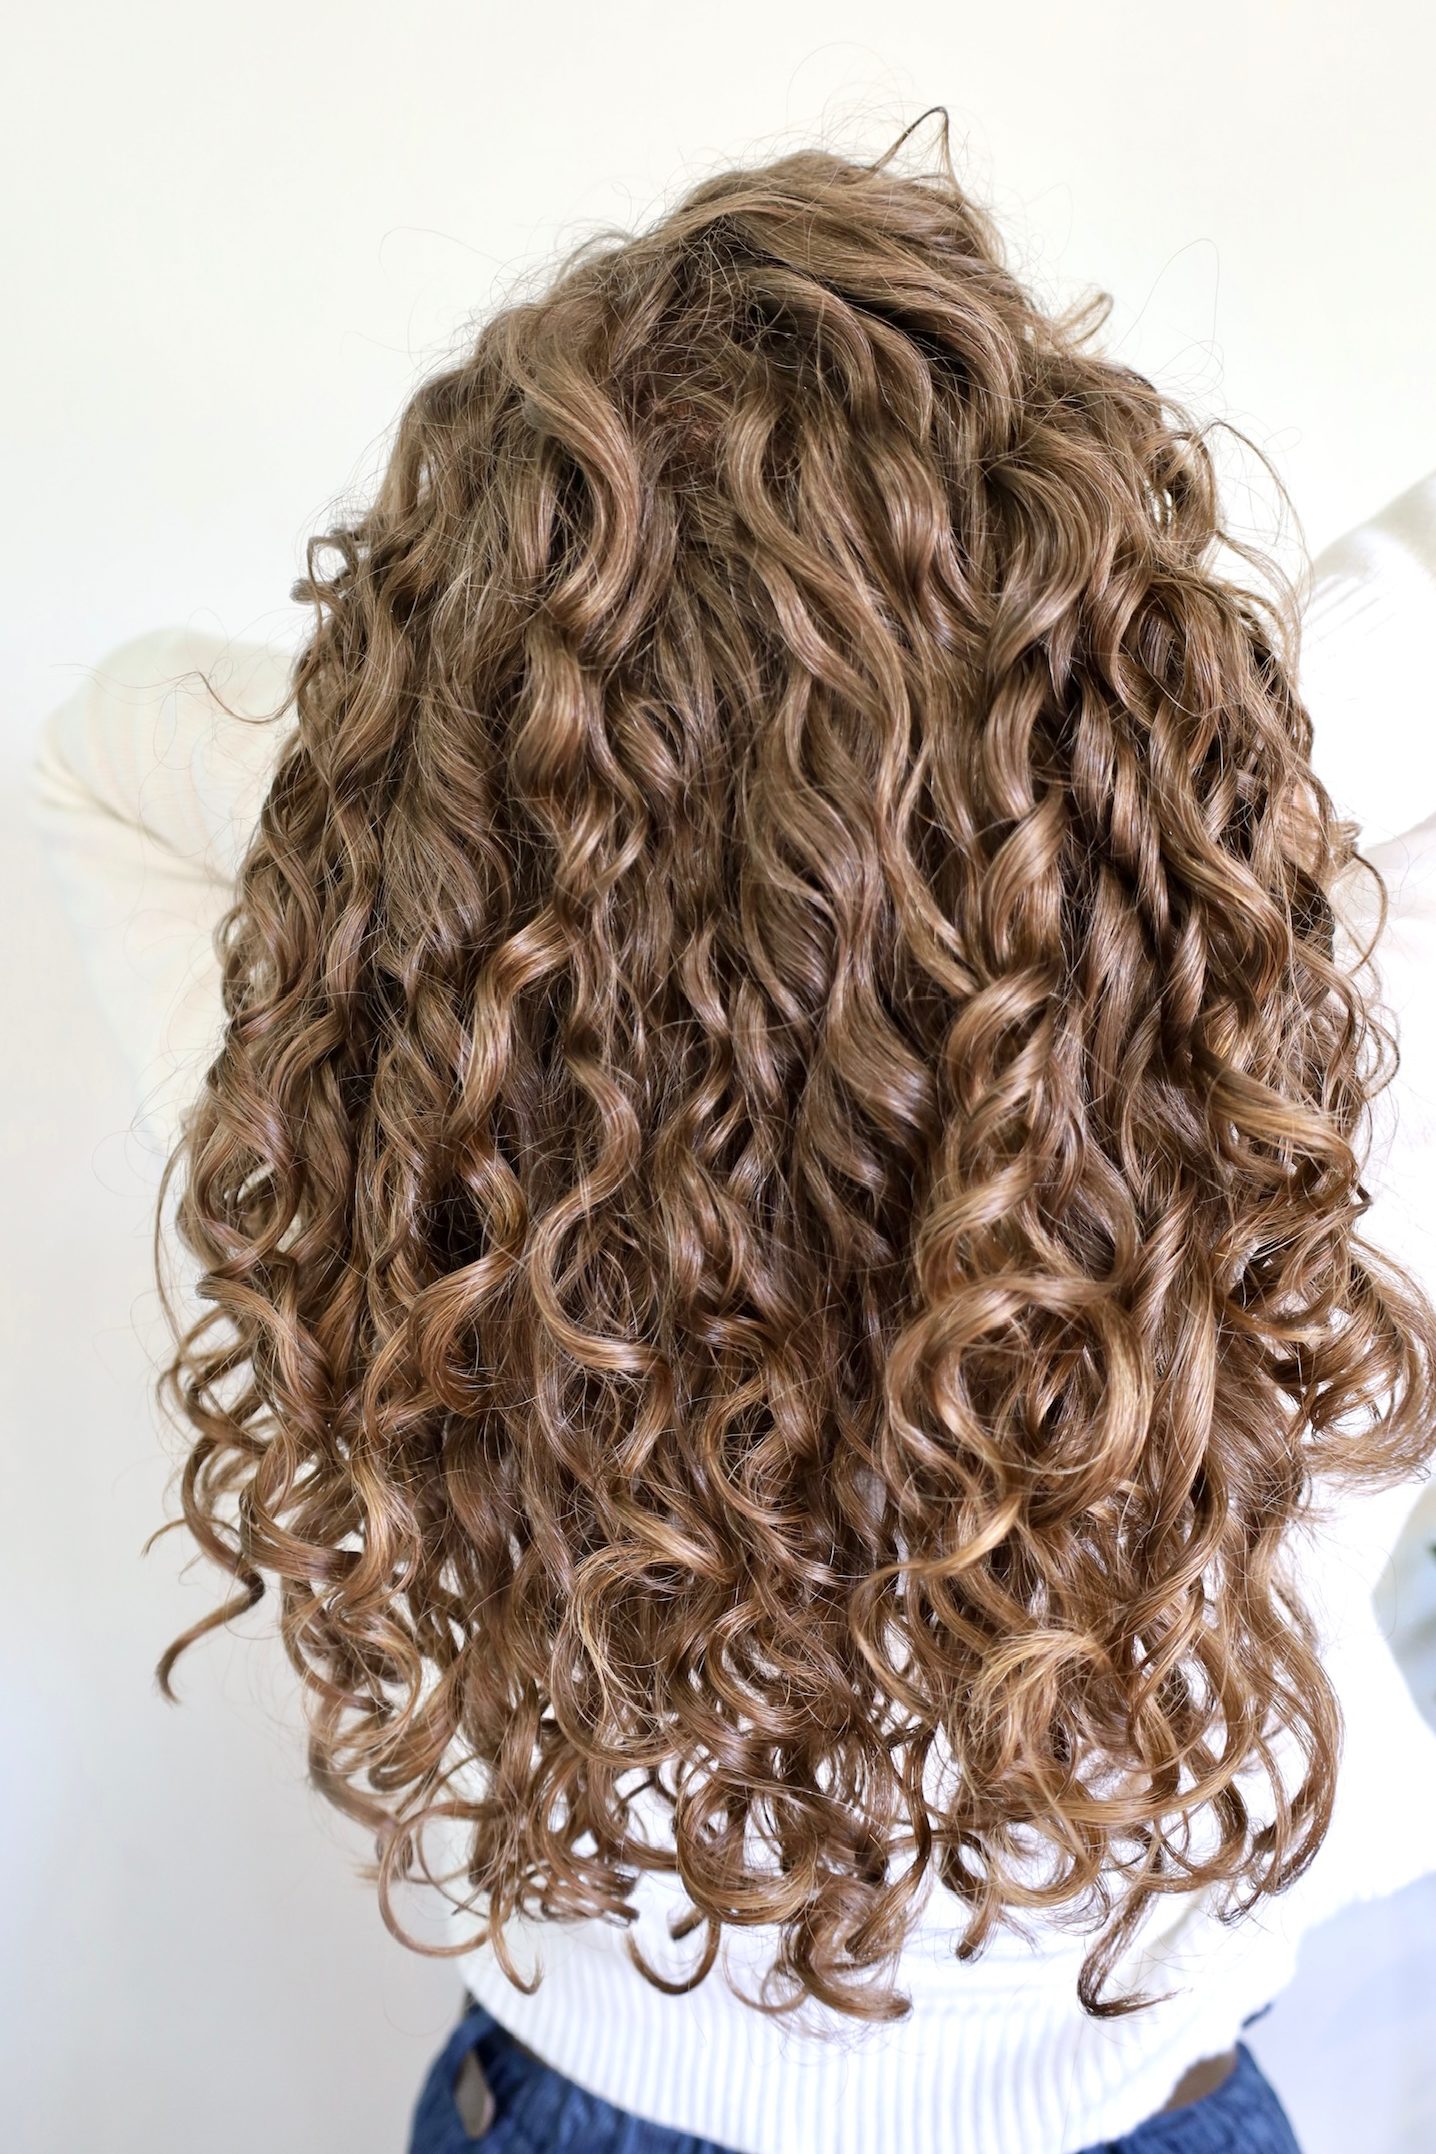 A photo of a woman with long, shiny, curly, brunette hair.